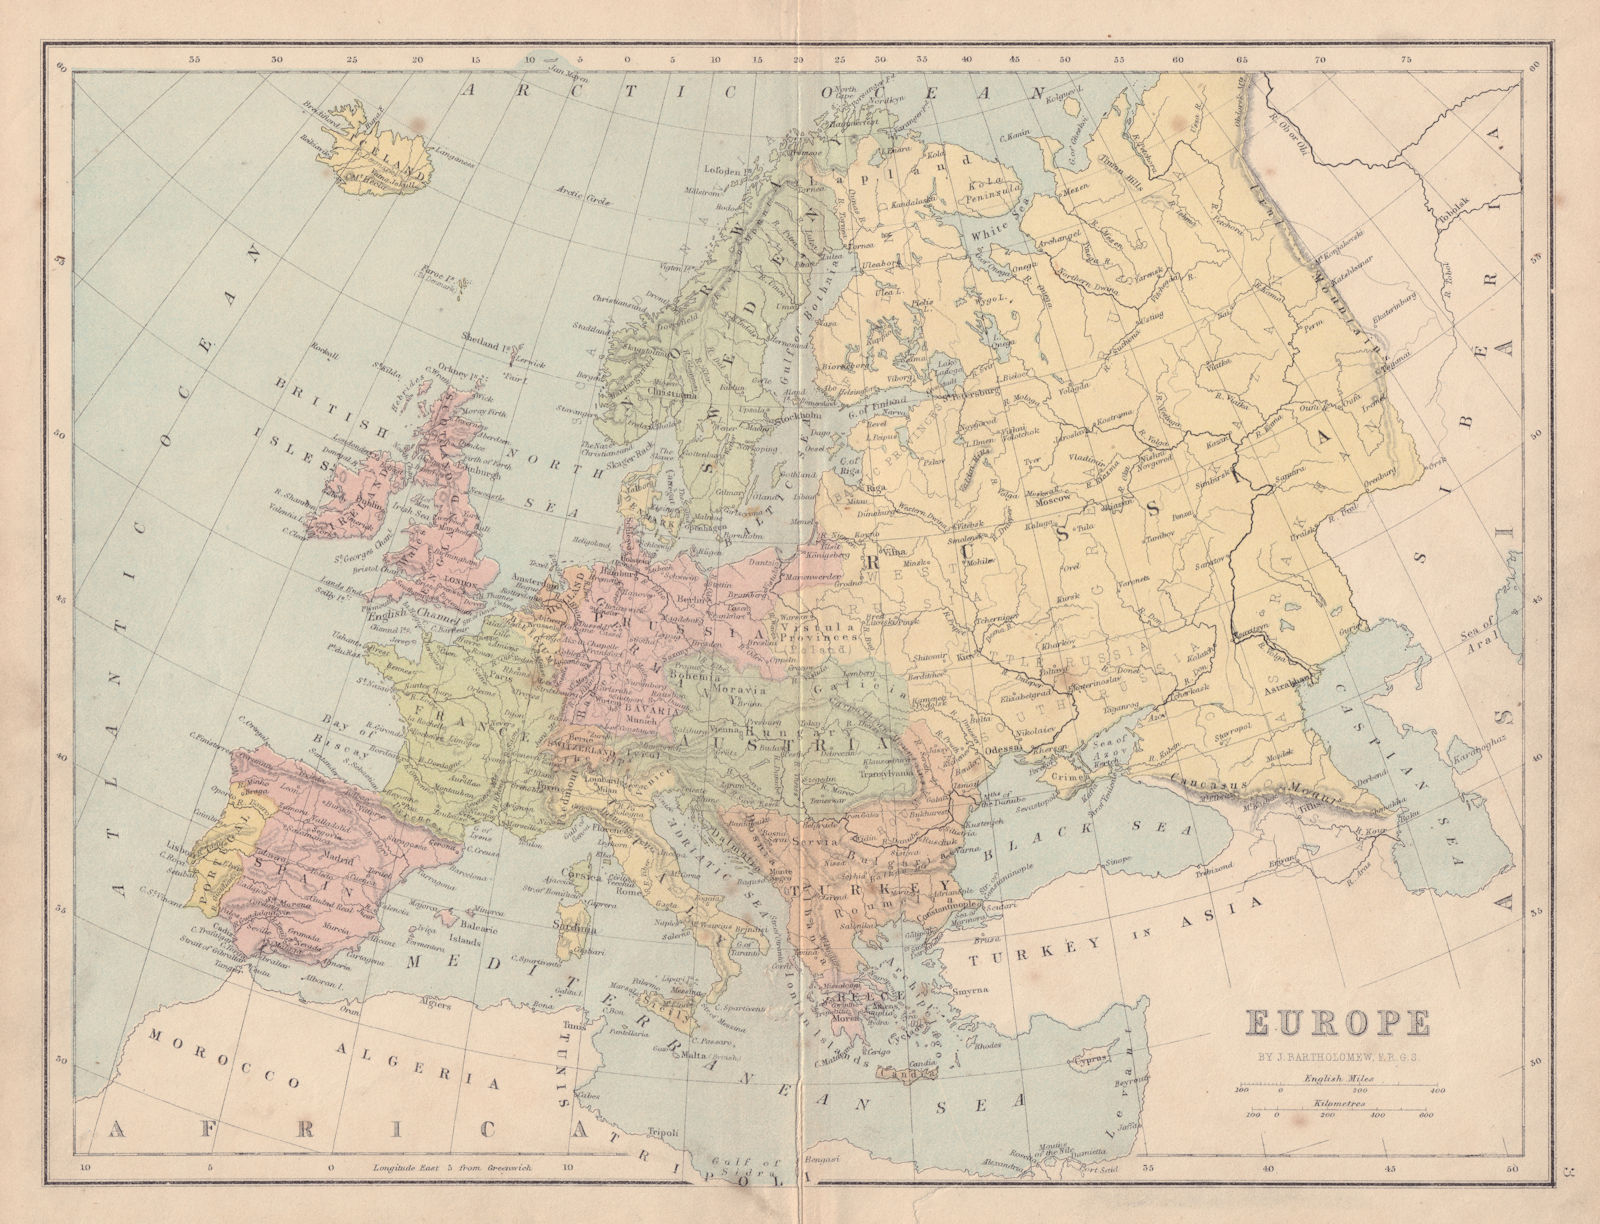 EUROPE Political. United Germany marked as Prussia. COLLINS 1873 old map